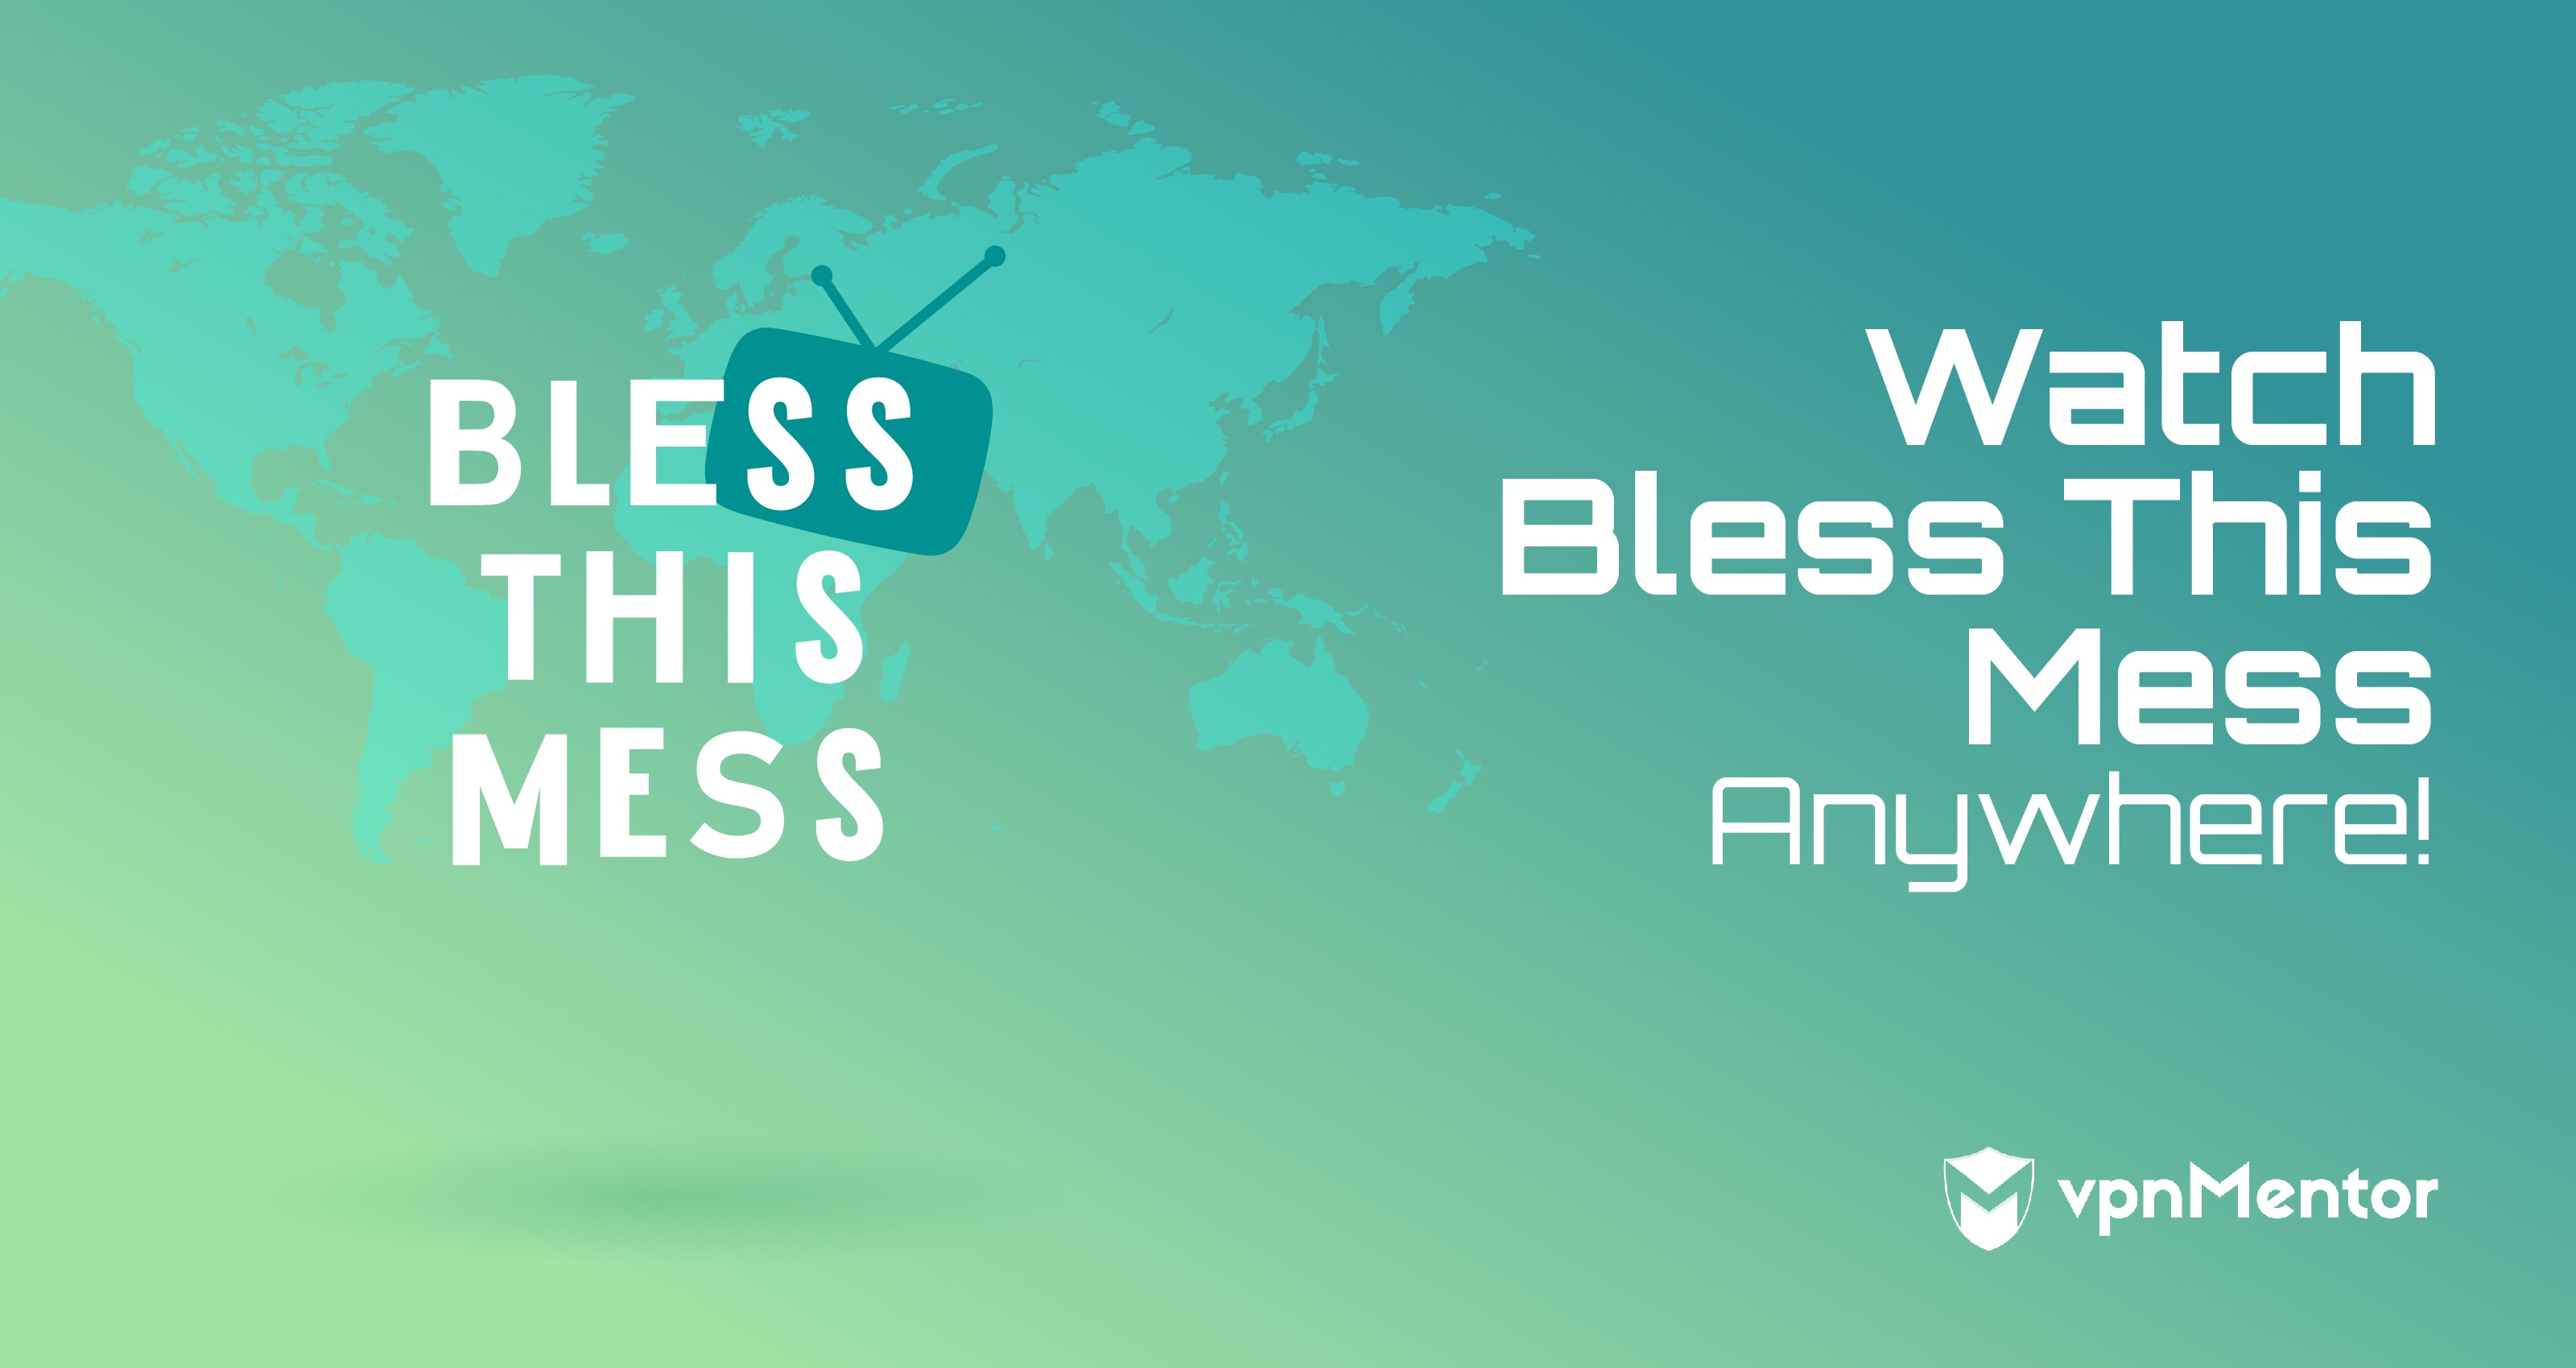 Watch Bless This Mess Season 2 Anywhere | Updated January 2023